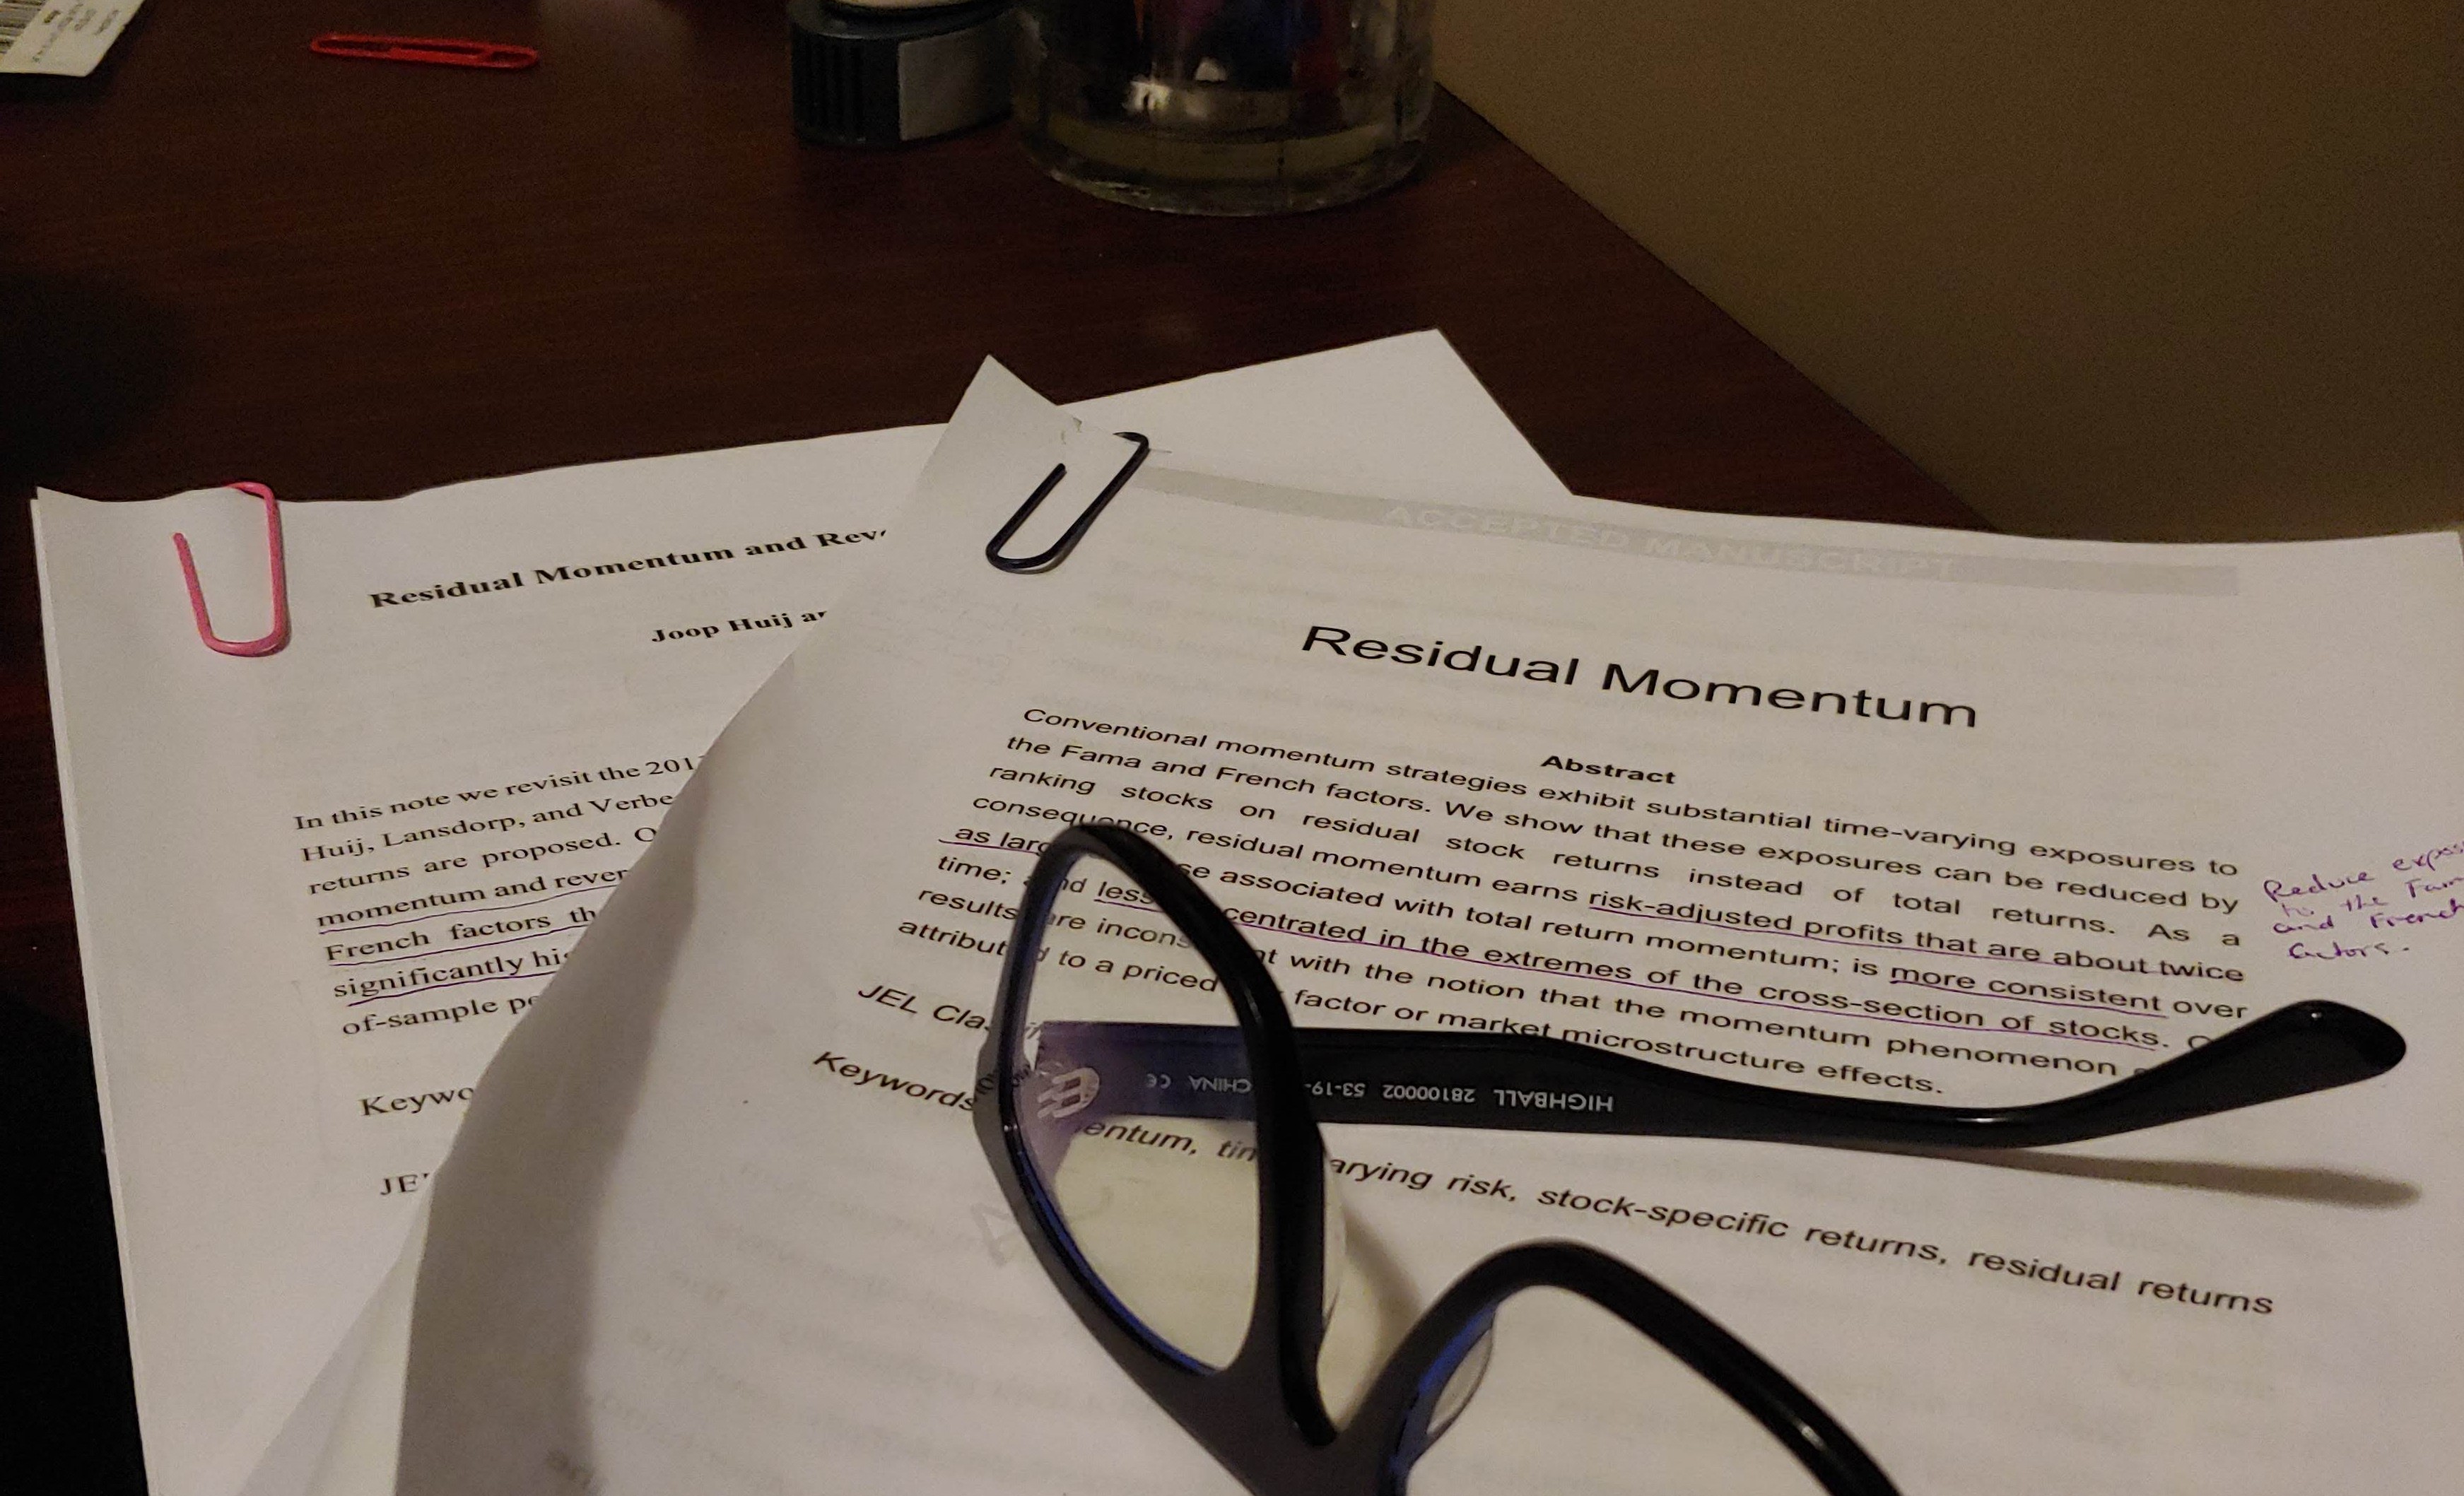 Residual Momentum research paper with glasses on top